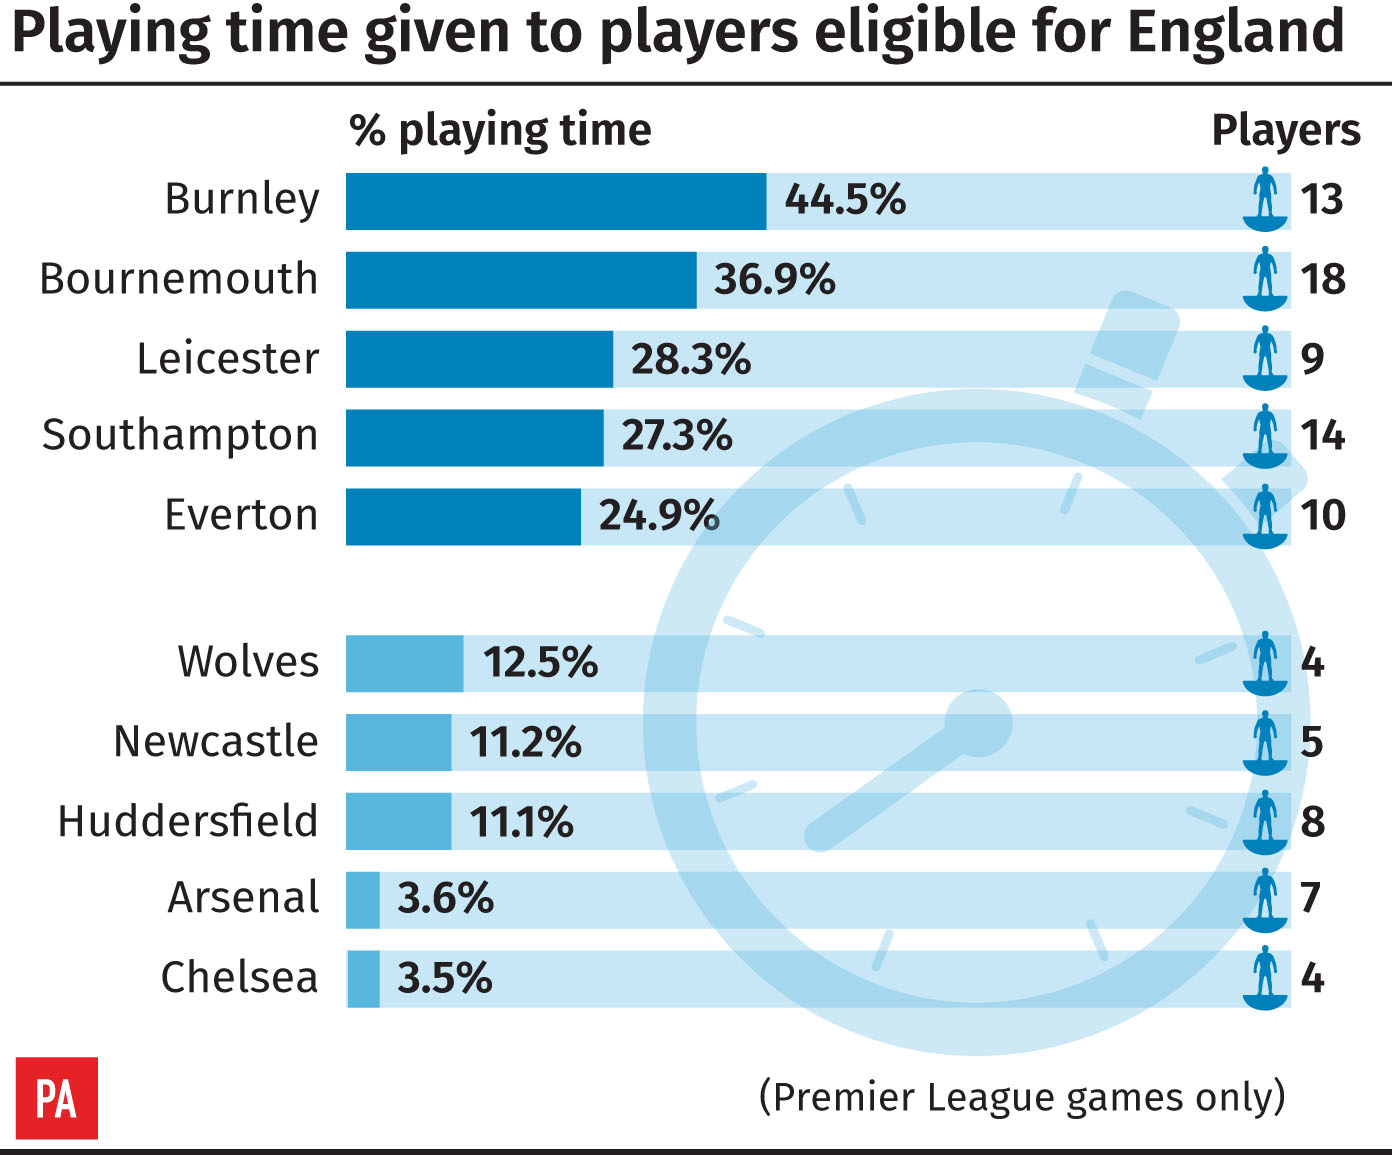 Premier League 2018-19 playing time for England-eligible players